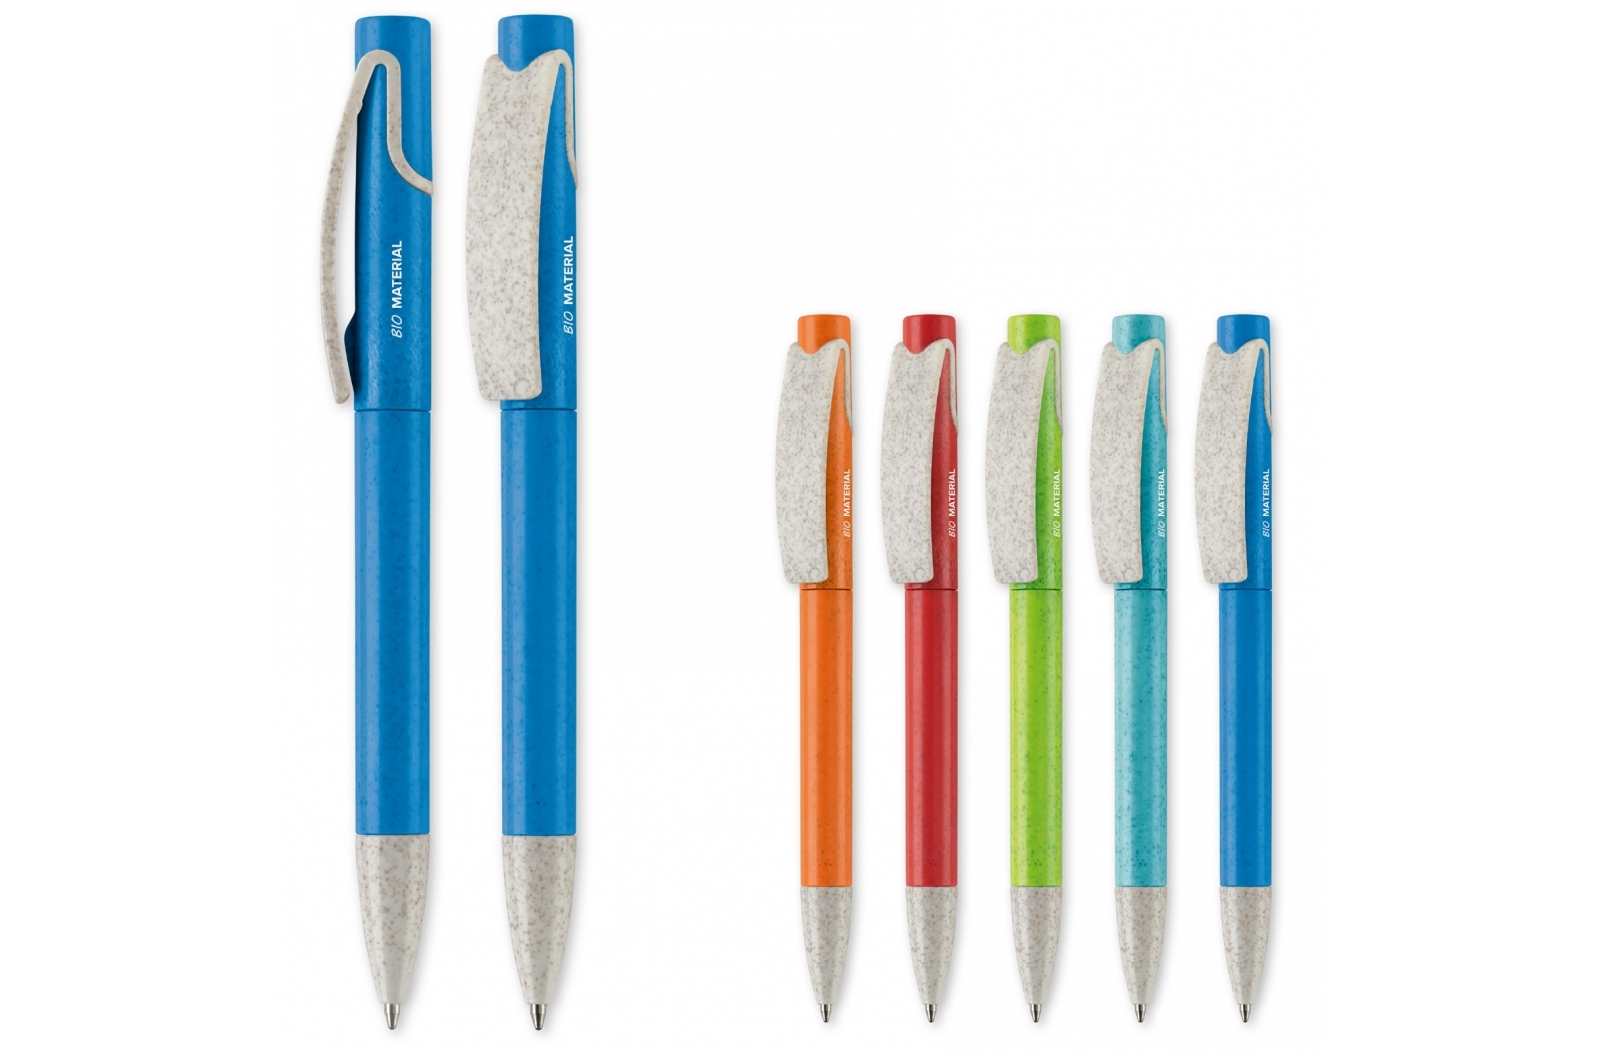 An elegantly designed ball pen made from wheat straw and ABS plastic - Drayton Bassett